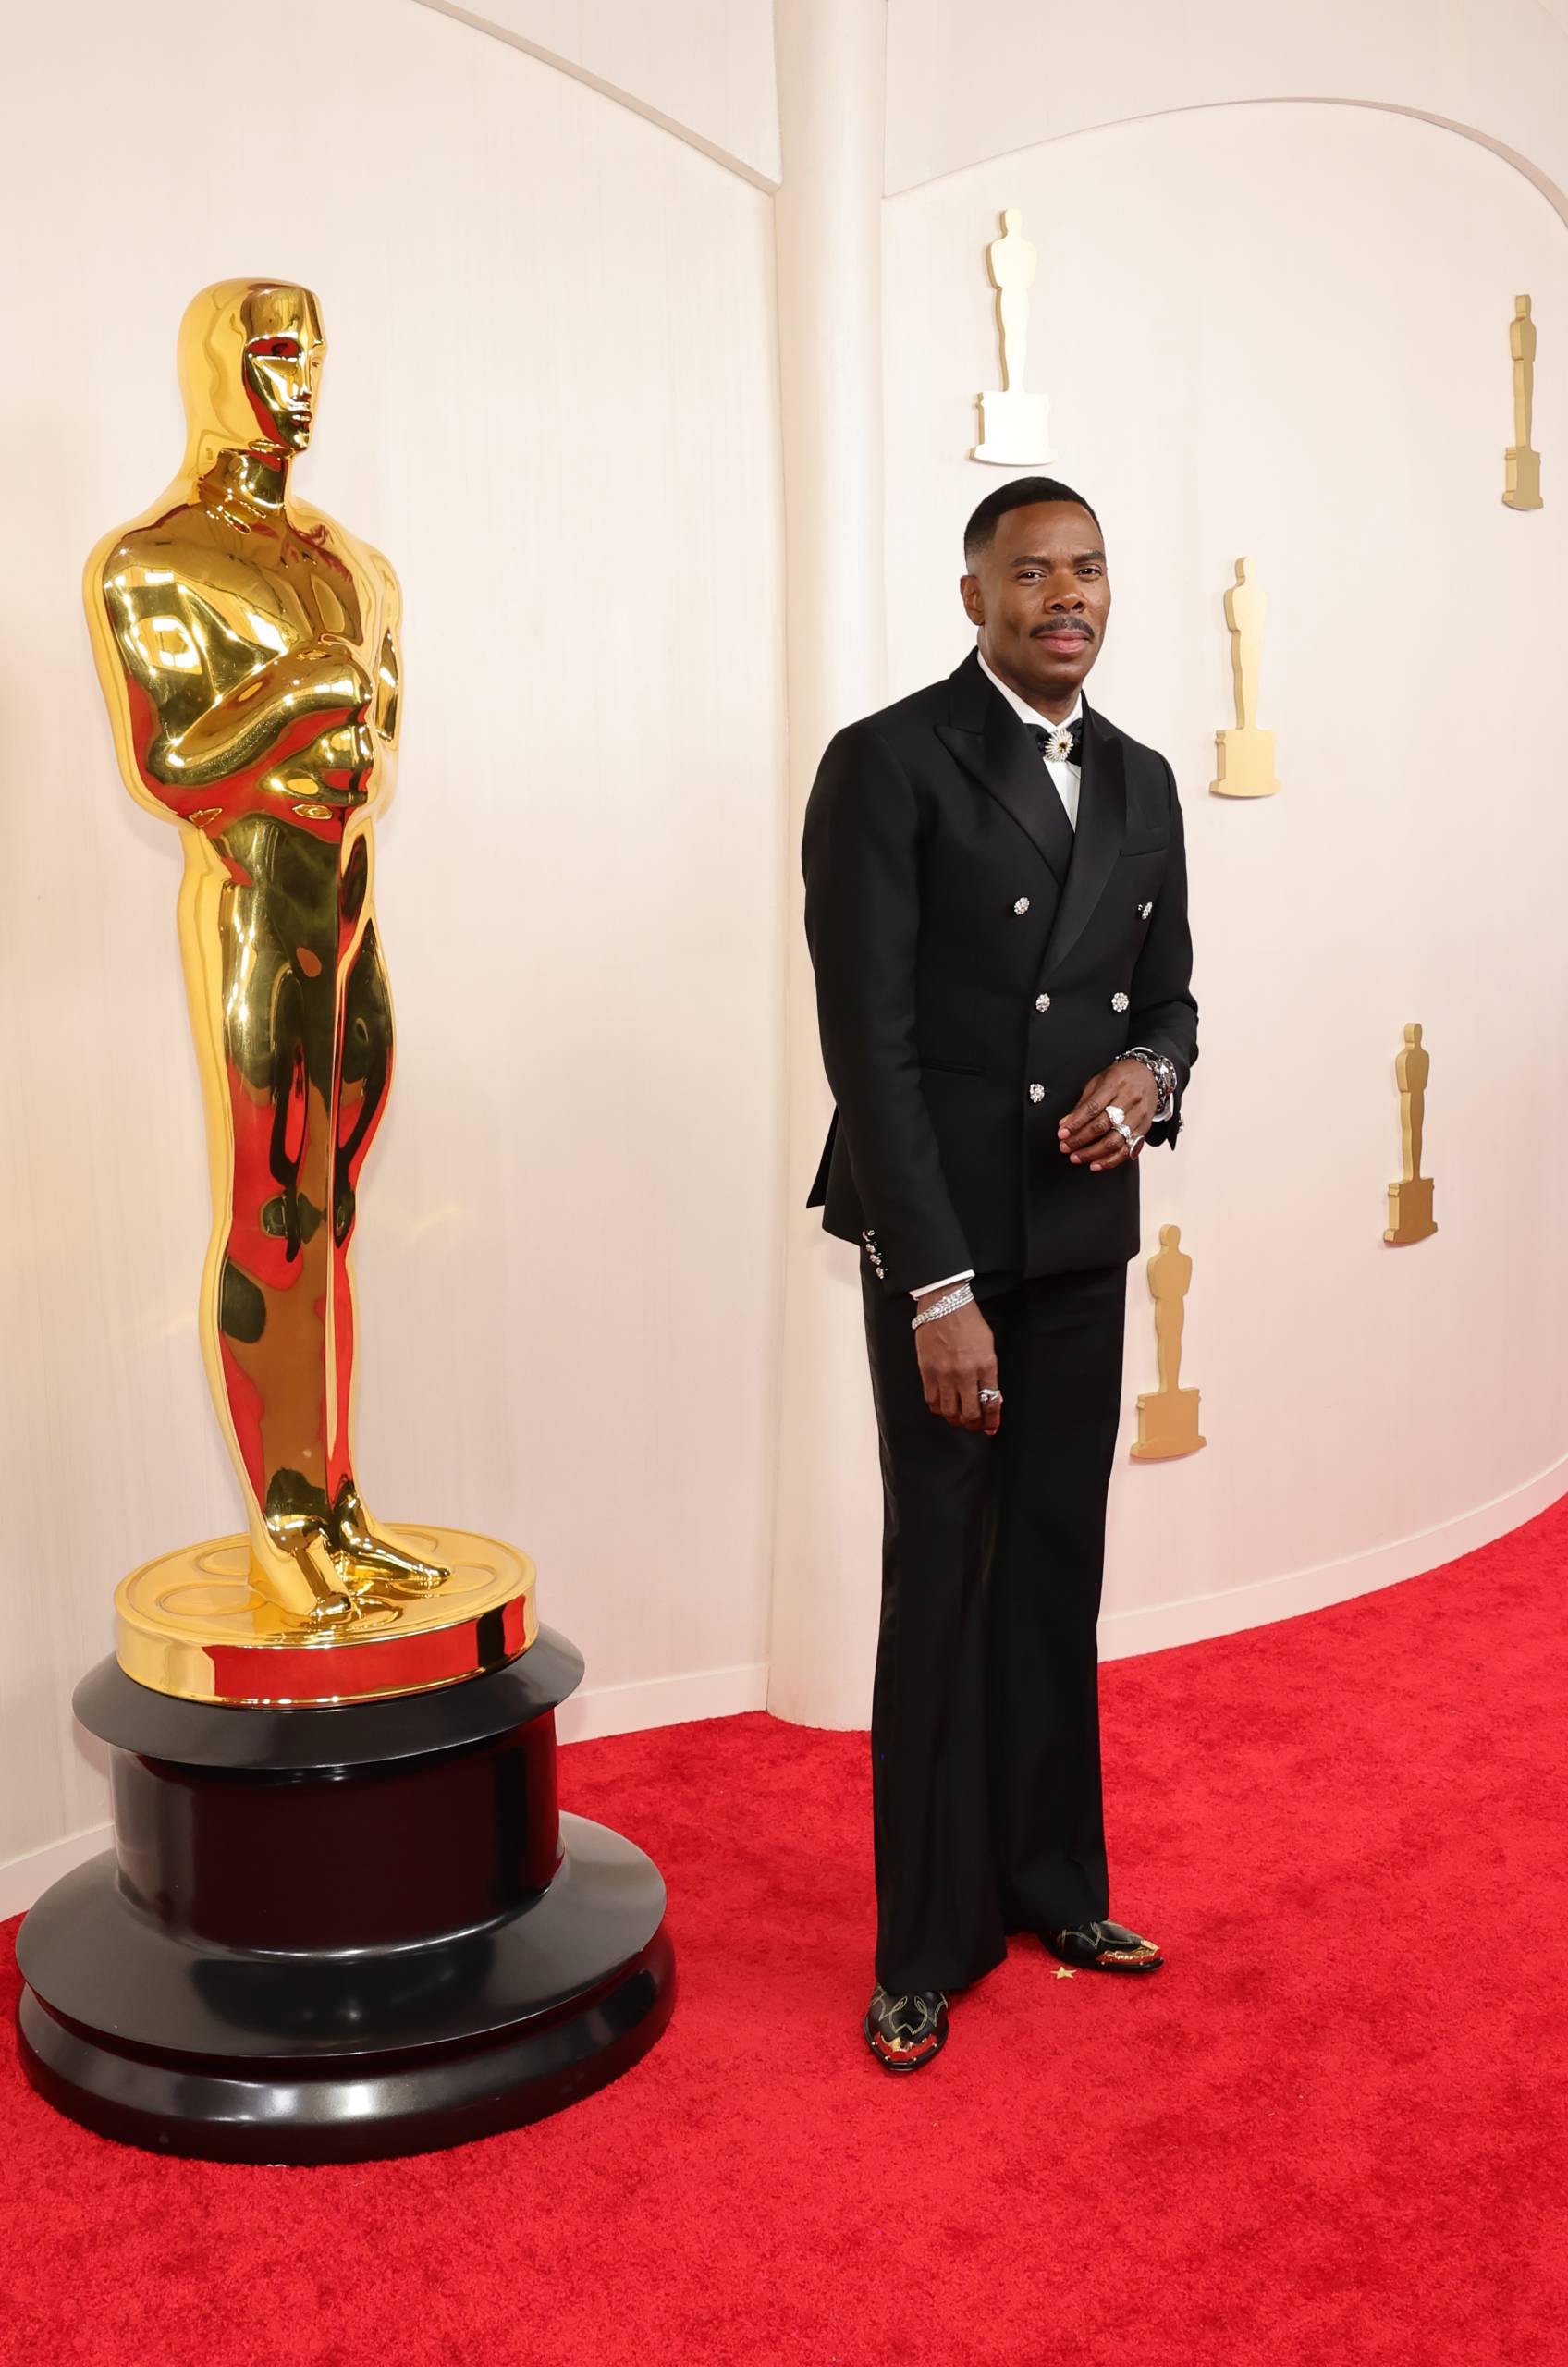 A black man in a black suit and white tie poses next to a life size Oscar statue.